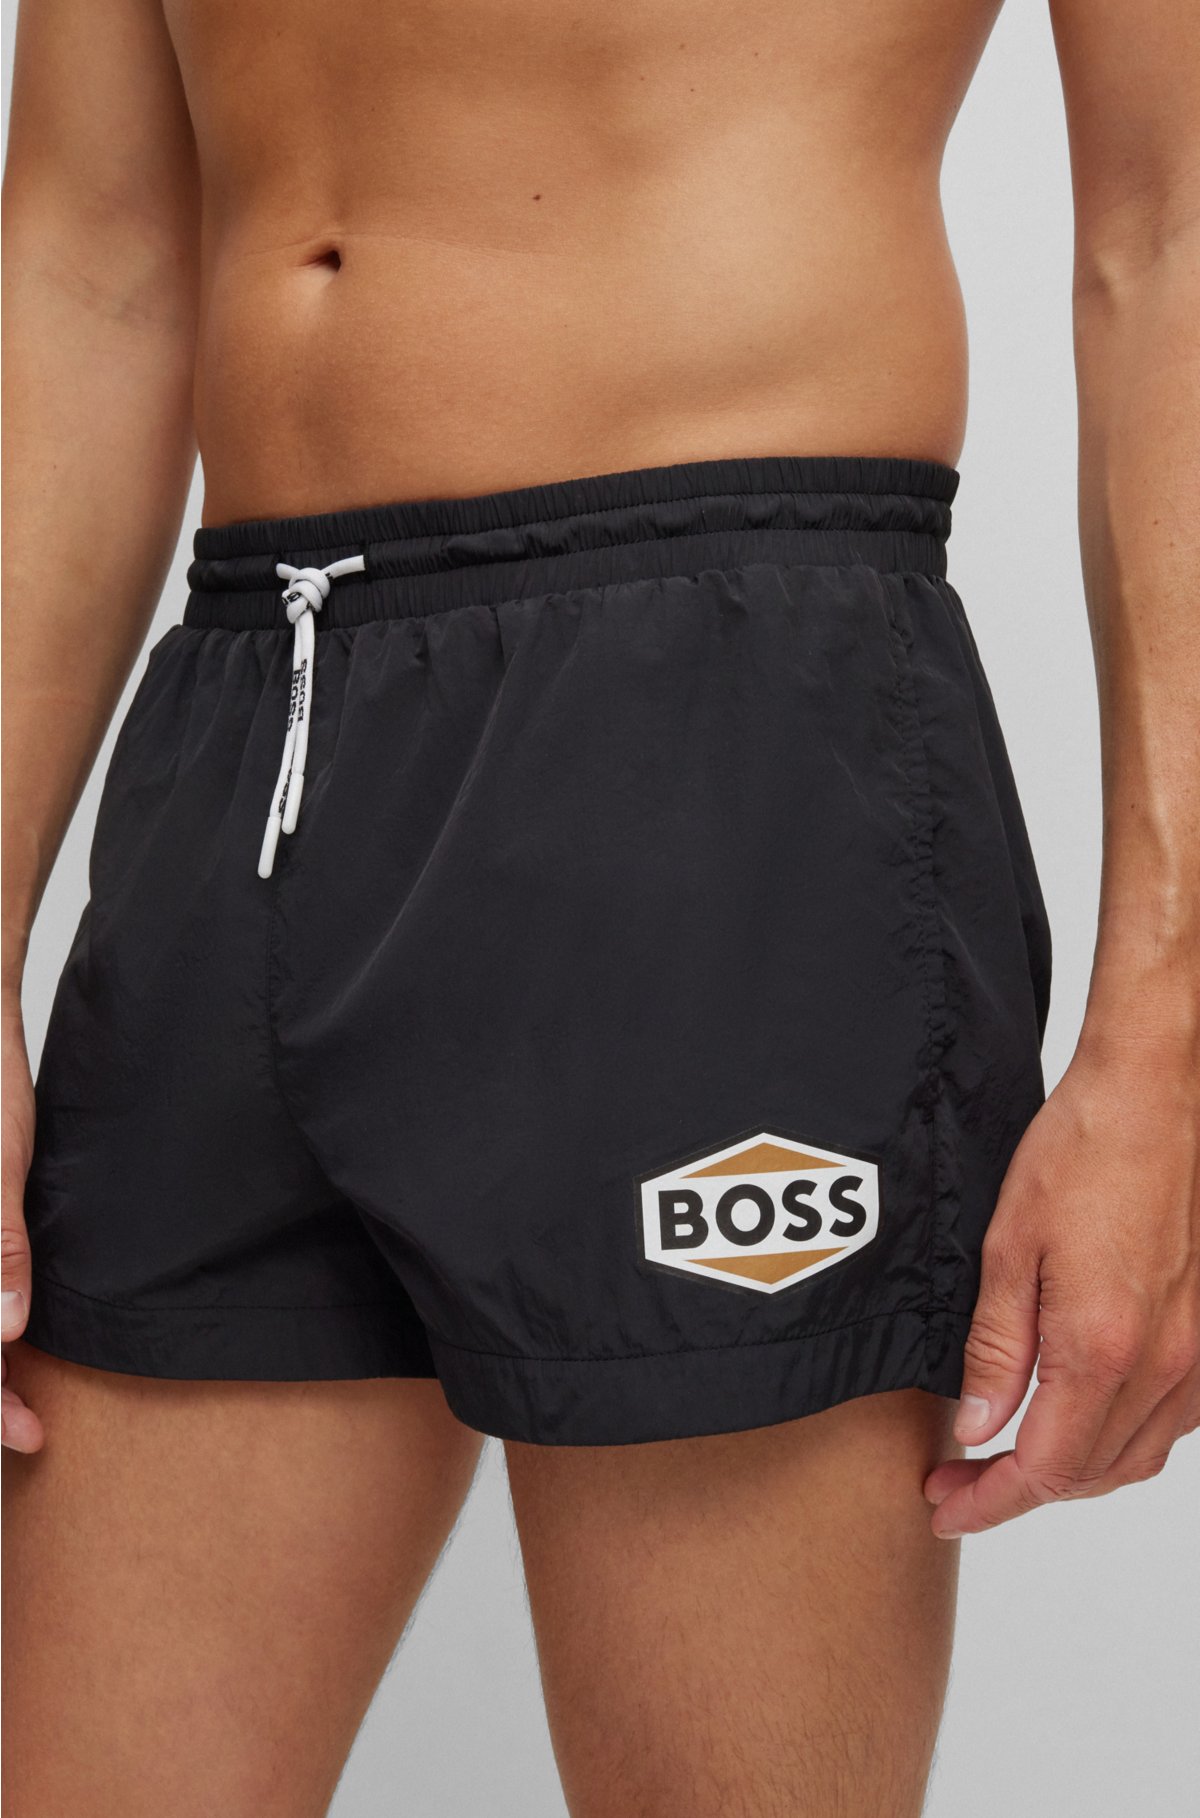 Quick-drying swim shorts with logo details, Black